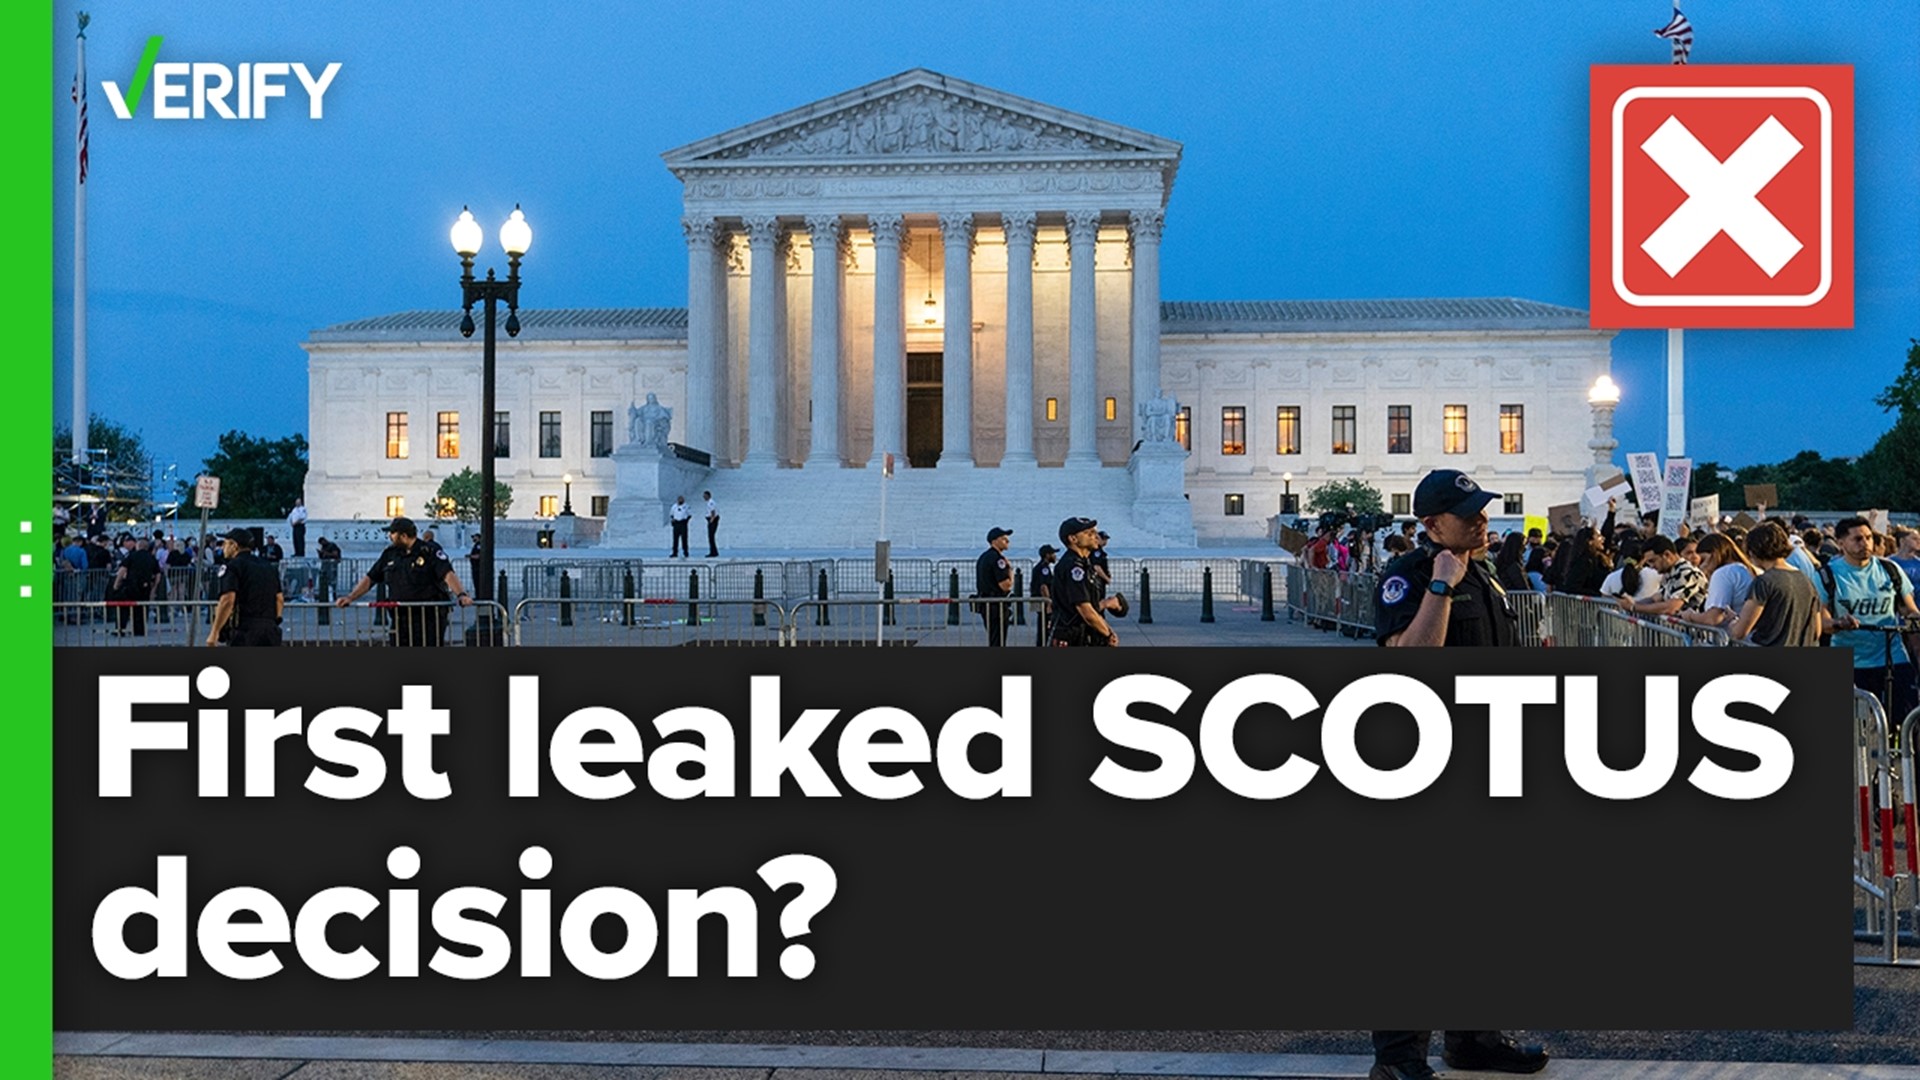 While leaks of Supreme Court votes are rare, they have happened. But past leaks were of decisions — never the full text of a draft opinion.